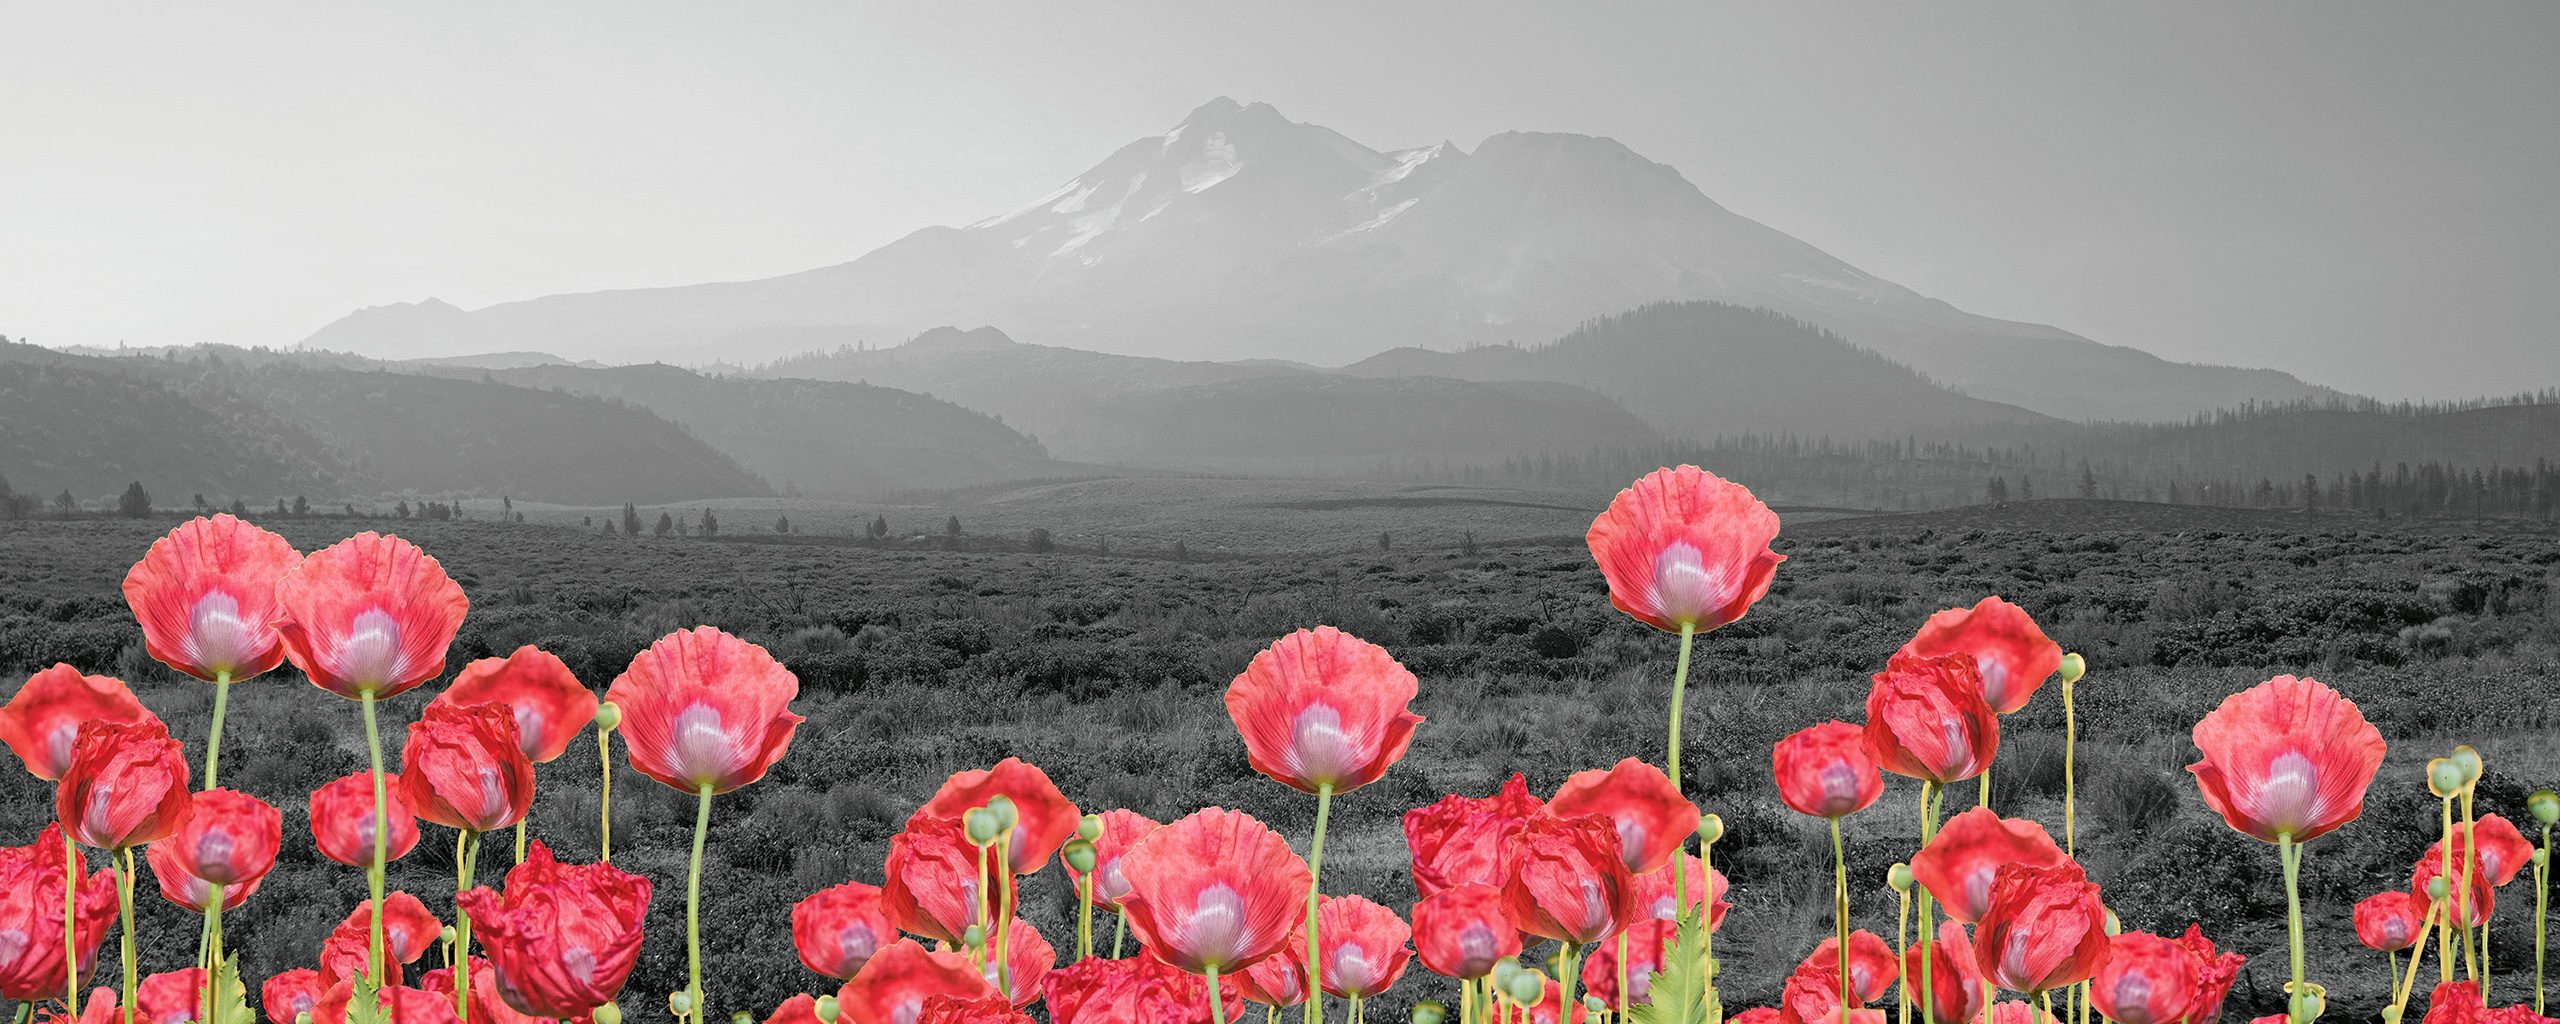 composite photo of colorful poppies in the foreground and a black & white mountain landscape in the background